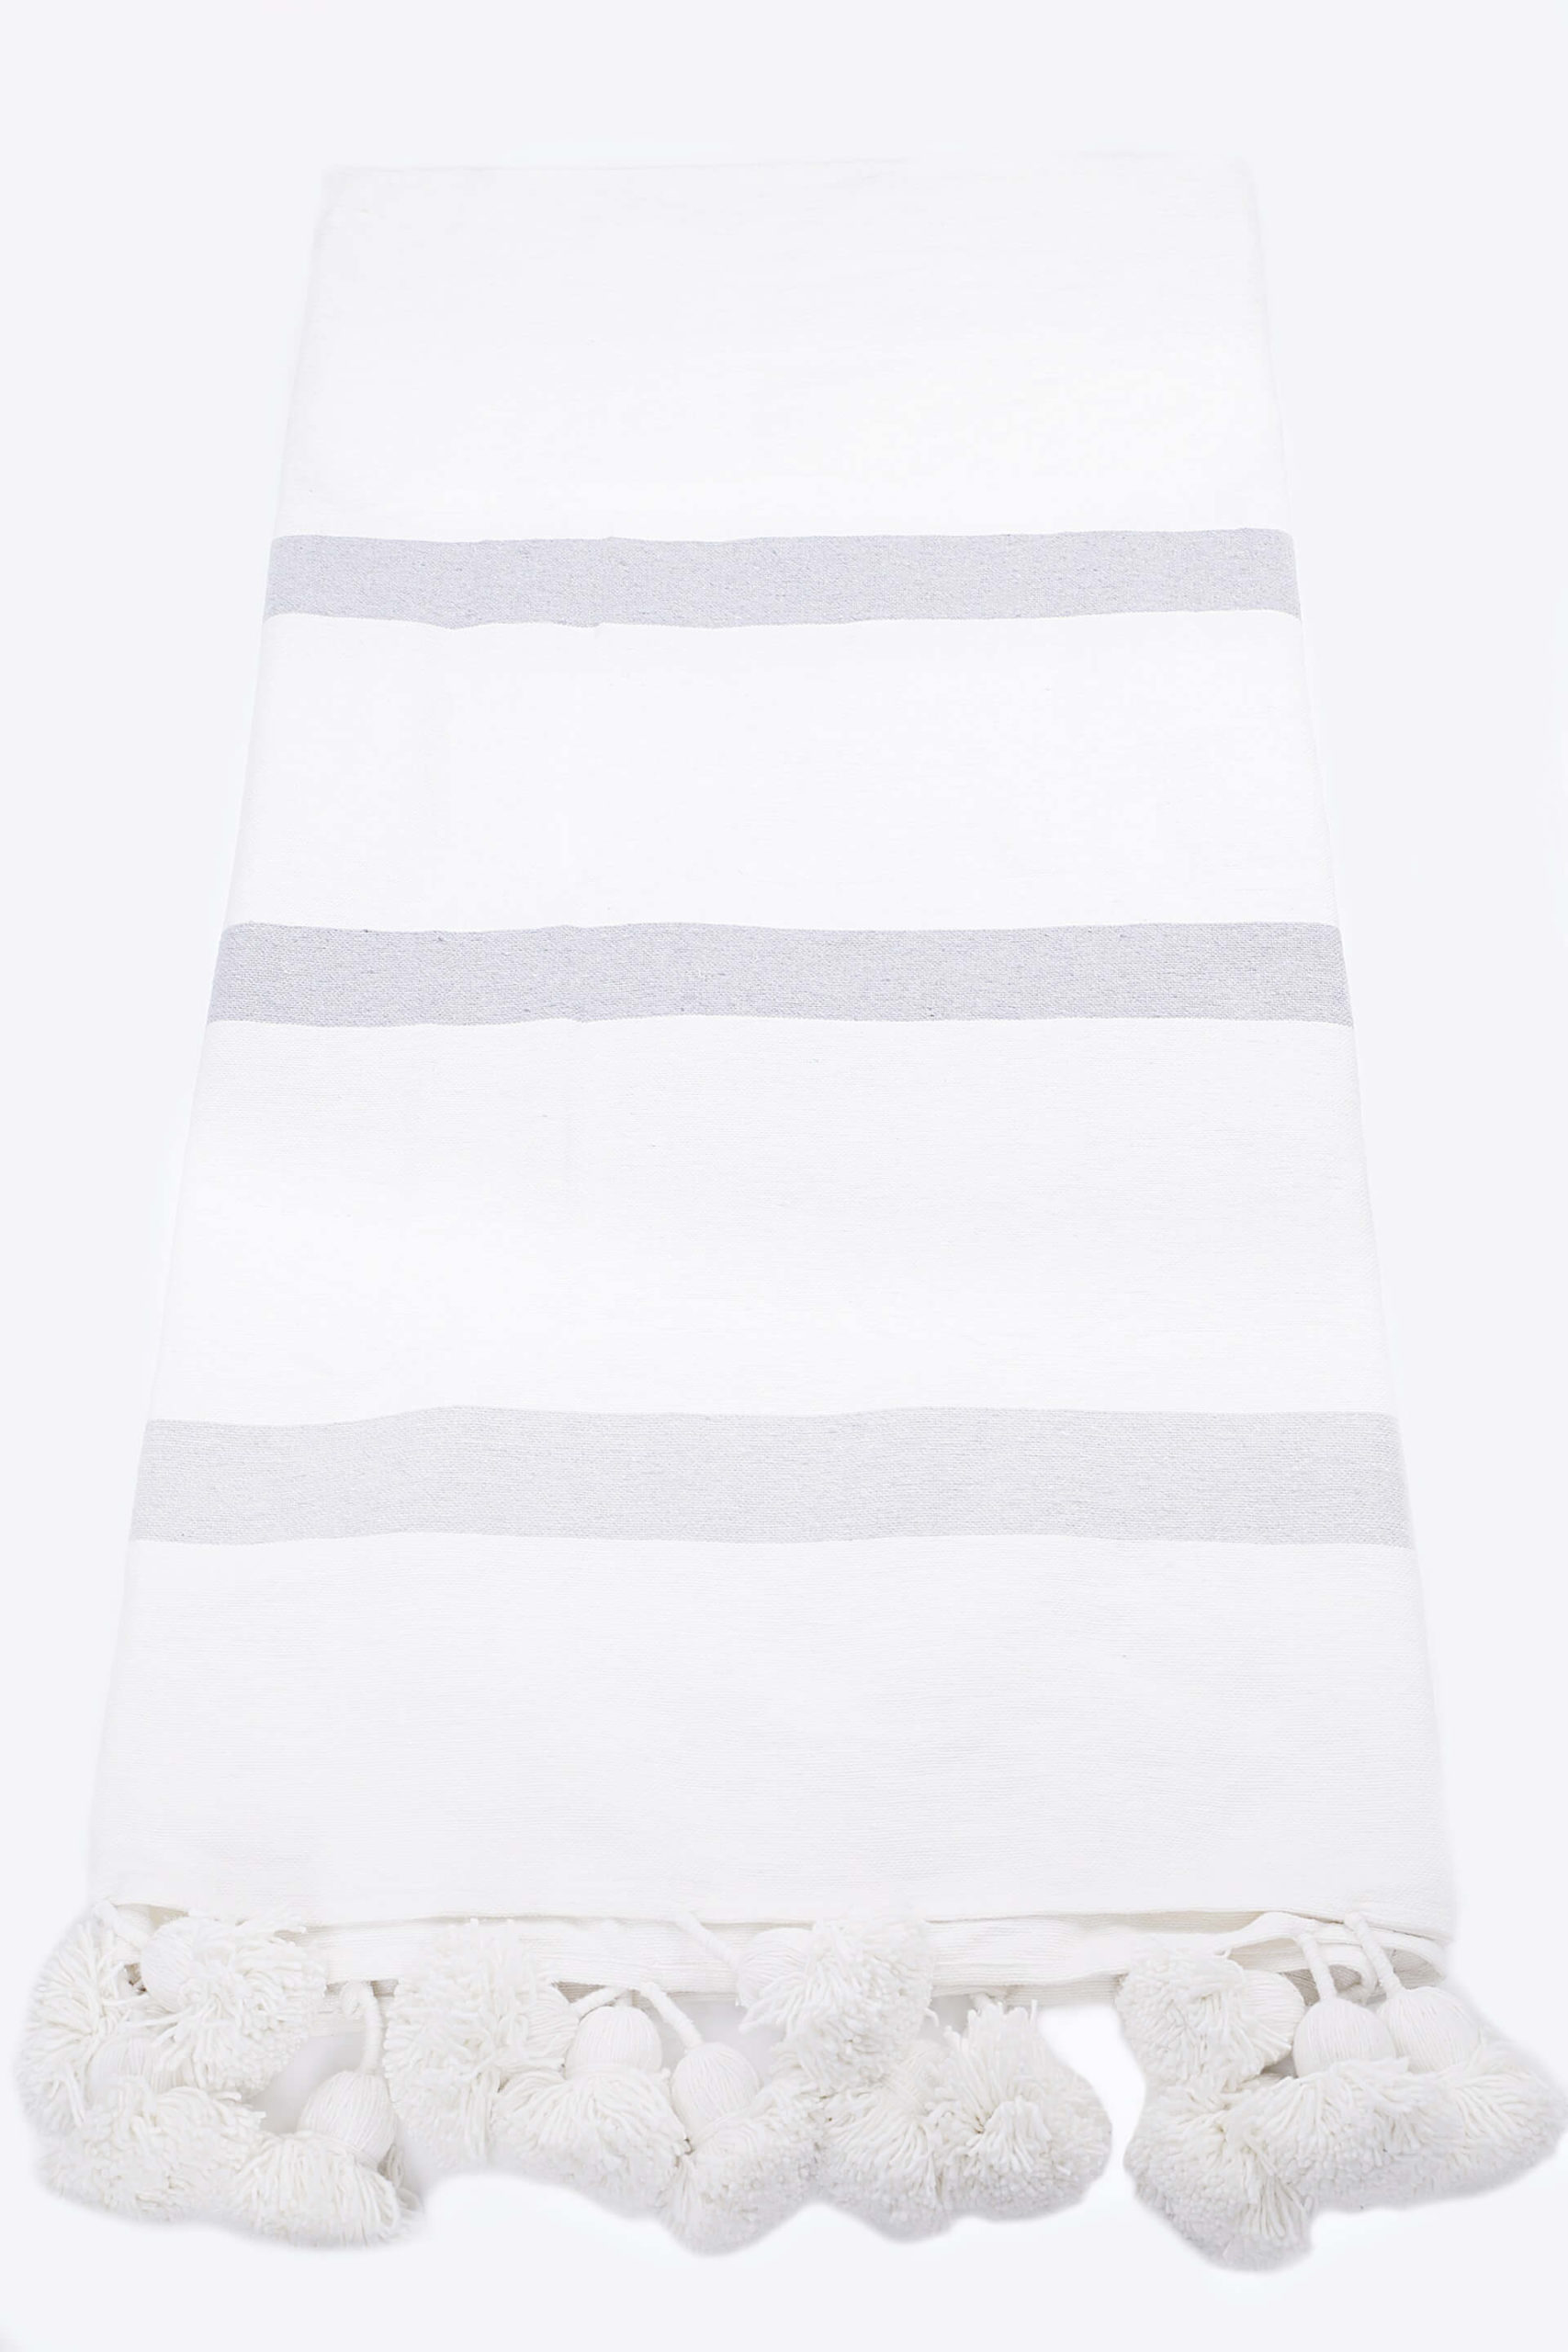 White blanket with grey lines